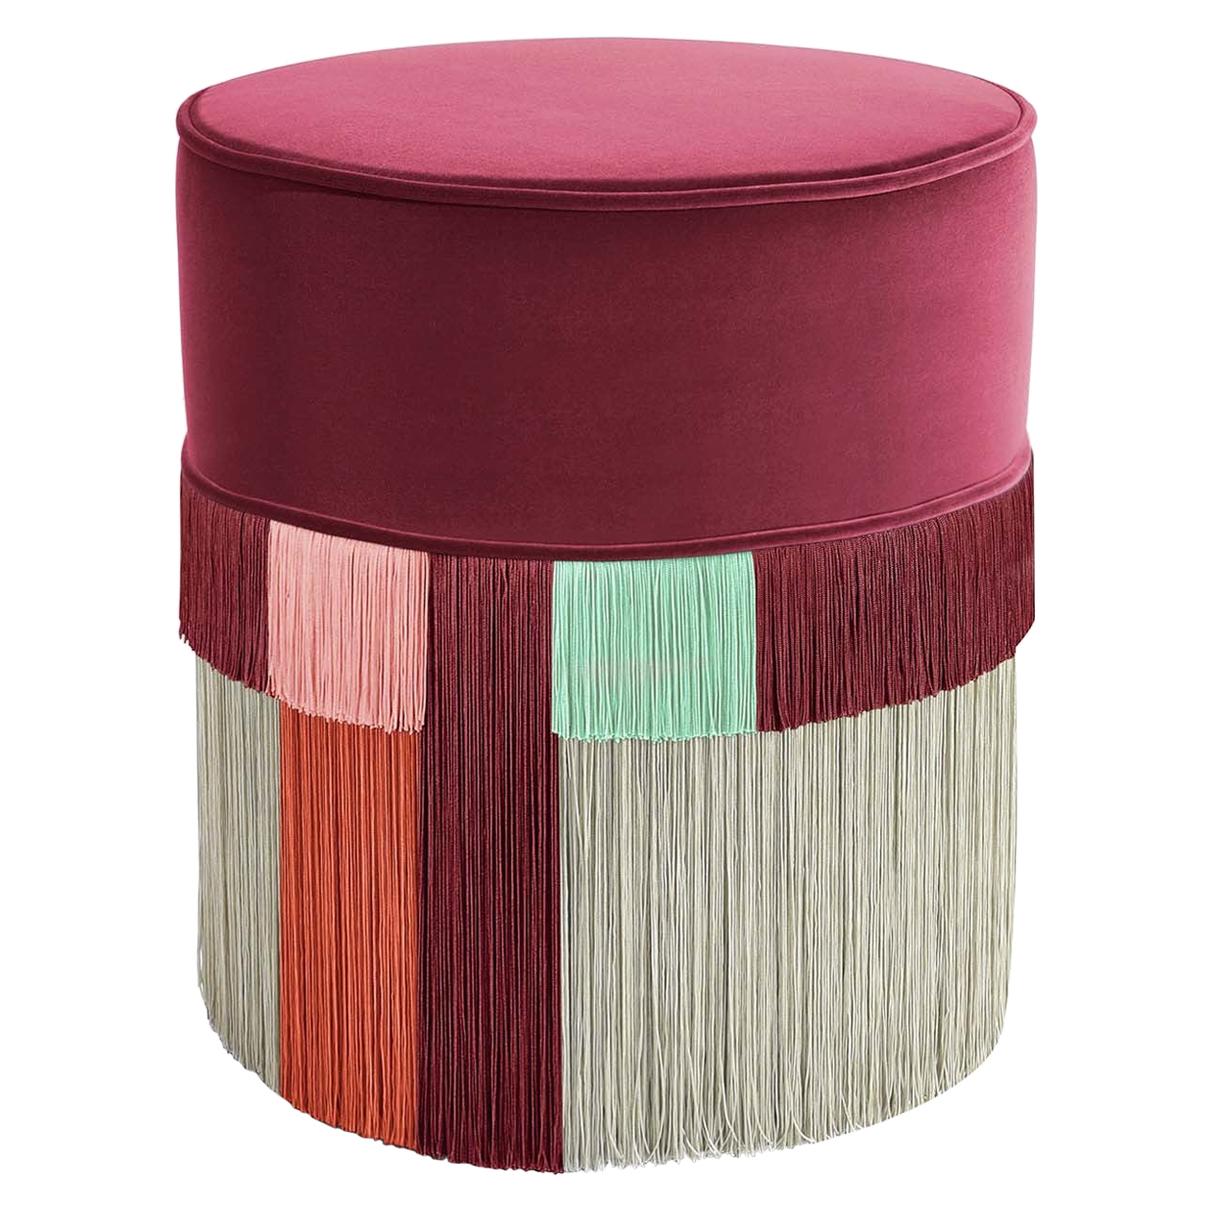 Burgundy Couture Geometric Wien Pouf For Sale